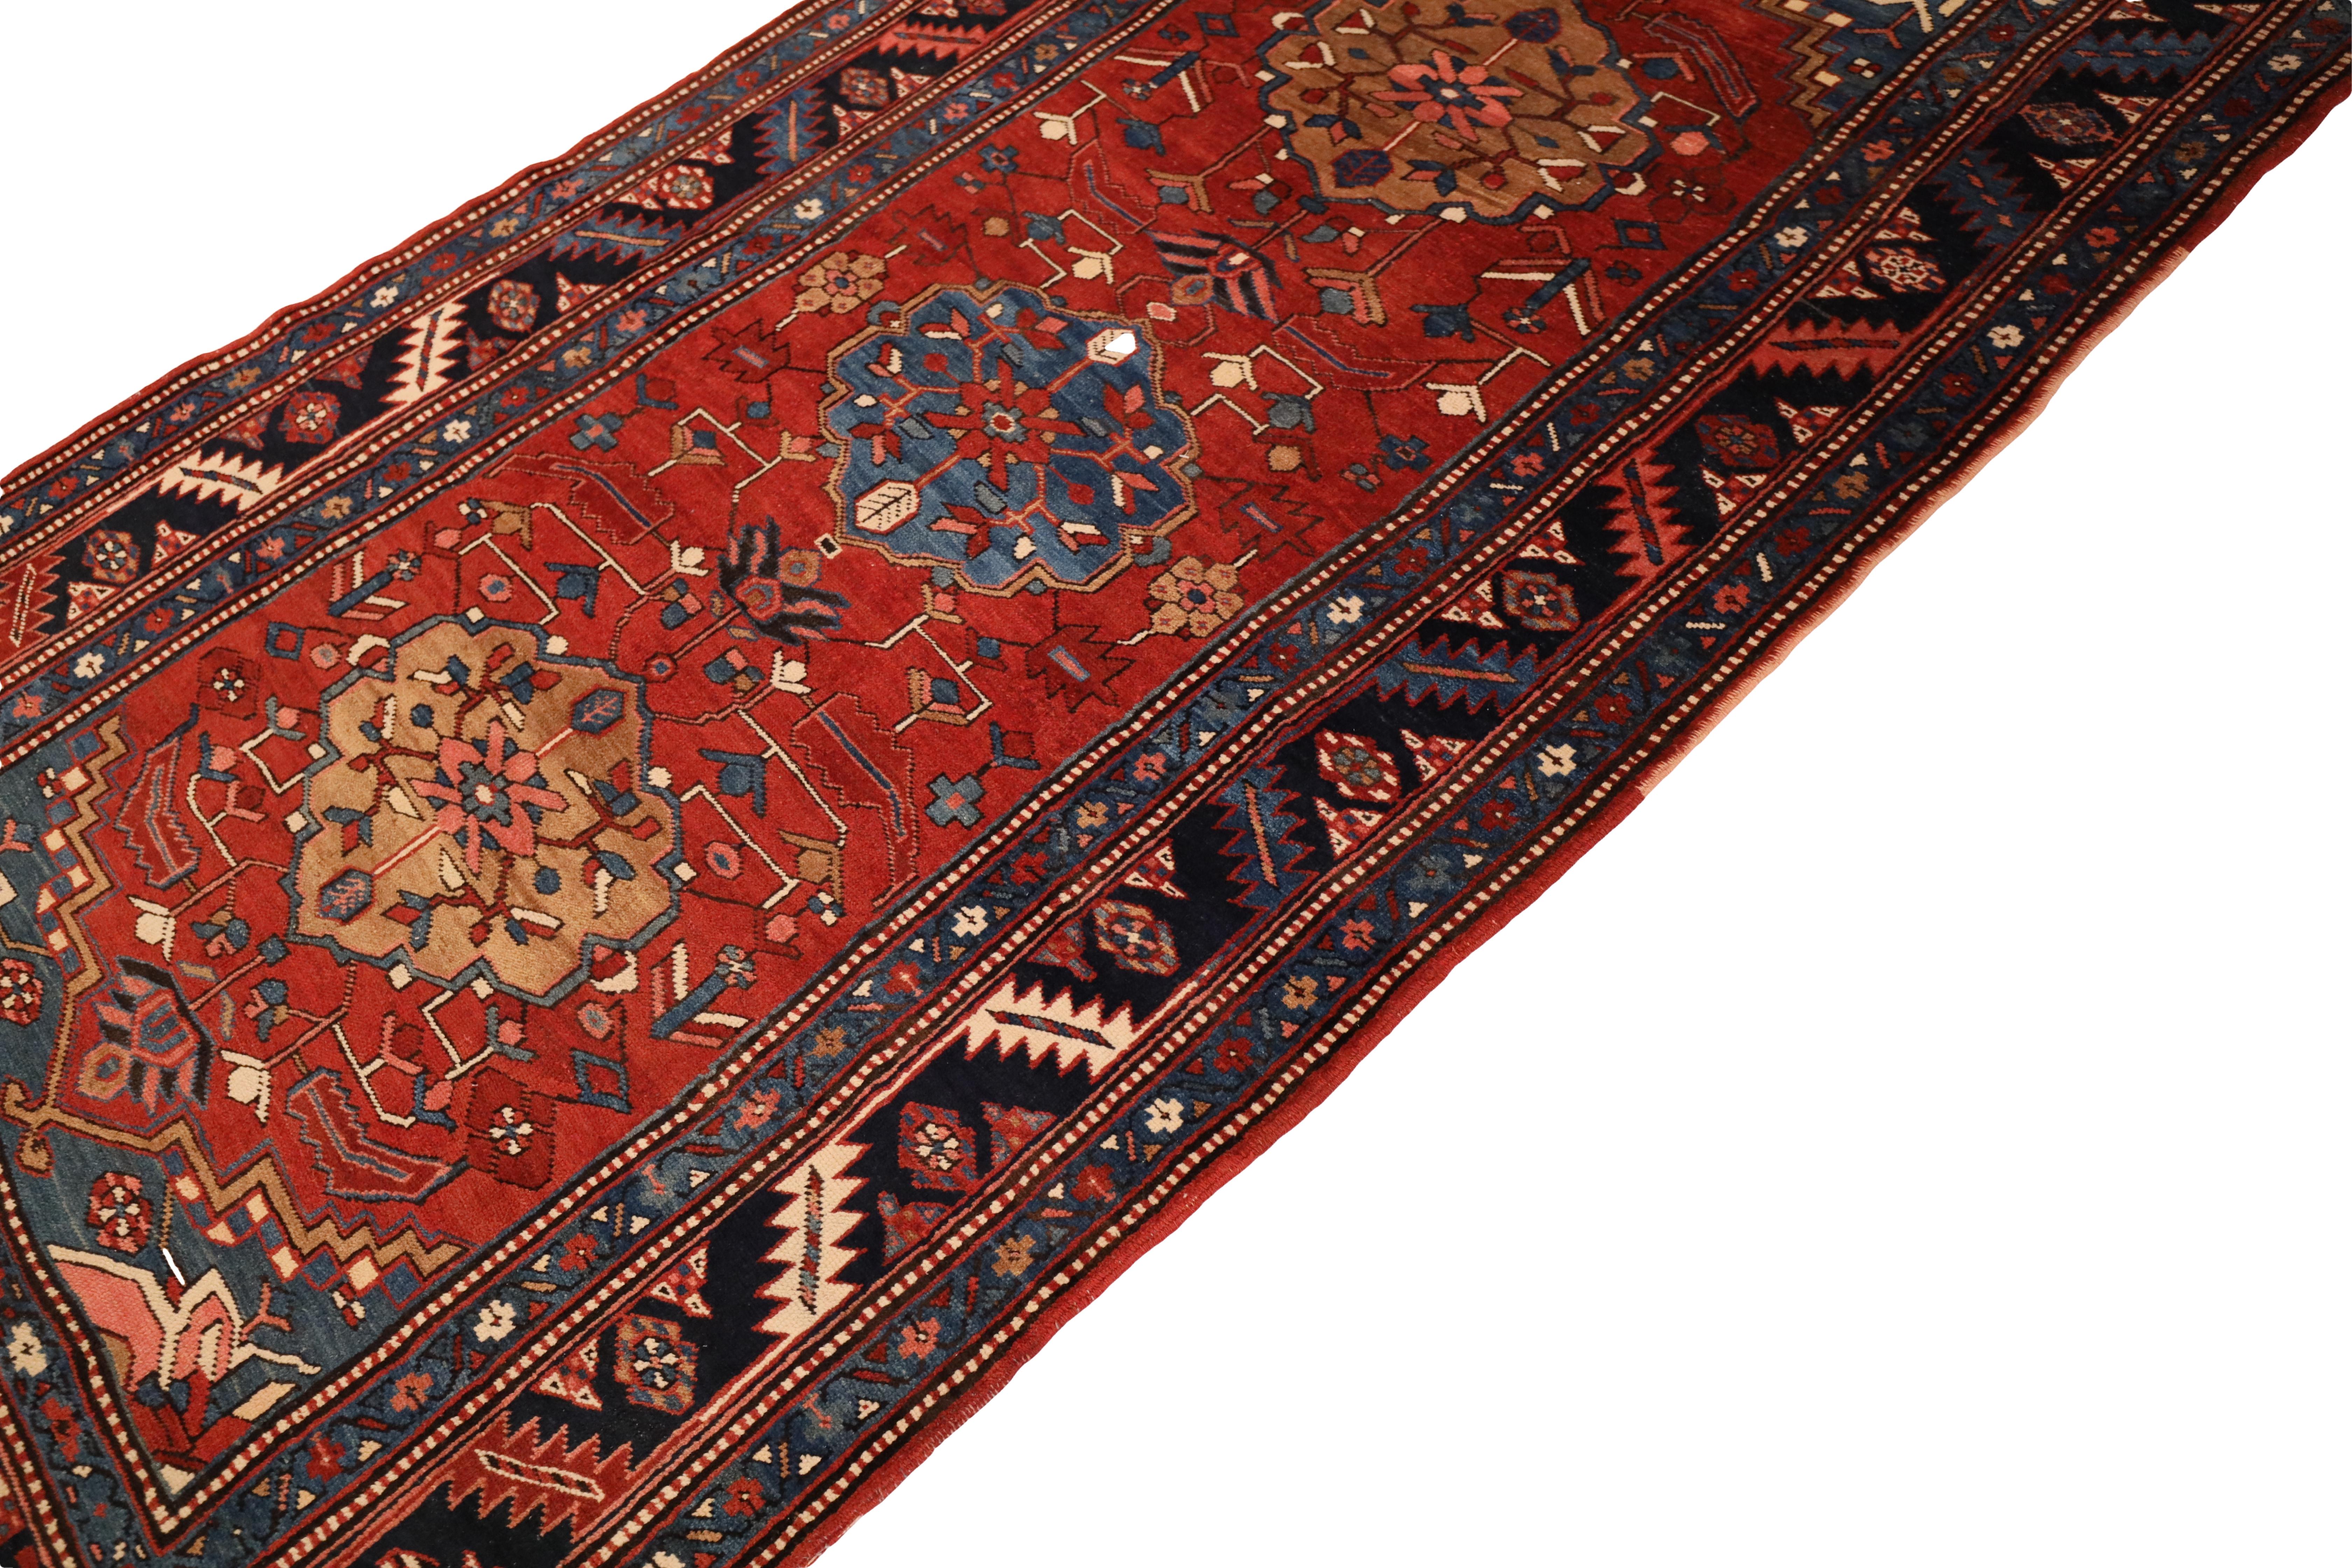 This exquisite antique Heriz carpet is a true masterpiece of Persian rug weaving. The rich ruby red background immediately catches the eye, exuding warmth and vibrancy. Three stunning medallions, alternating in beige, blue, and beige, run down the